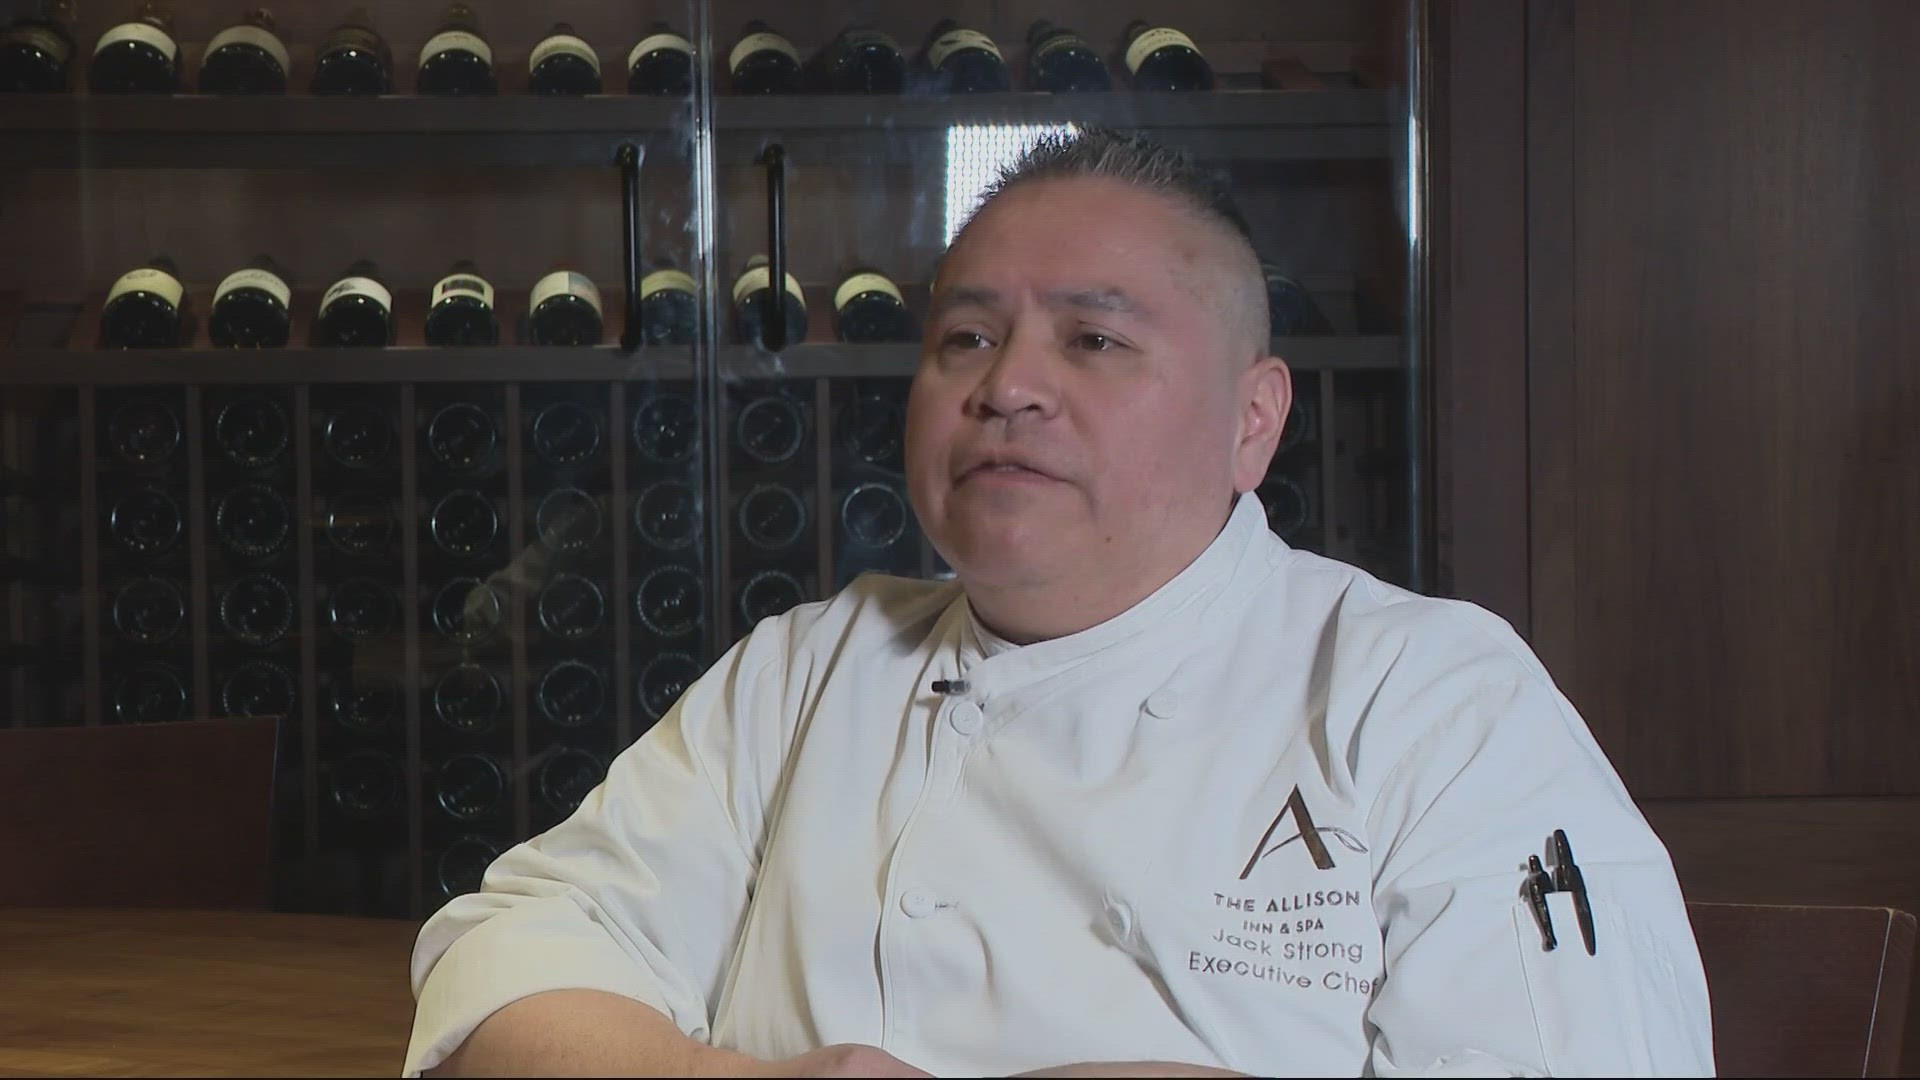 At JORY inside Allison Inn, Jack Strong of the Confederated Tribes of Siletz Indians highlights his culture in his cuisine.